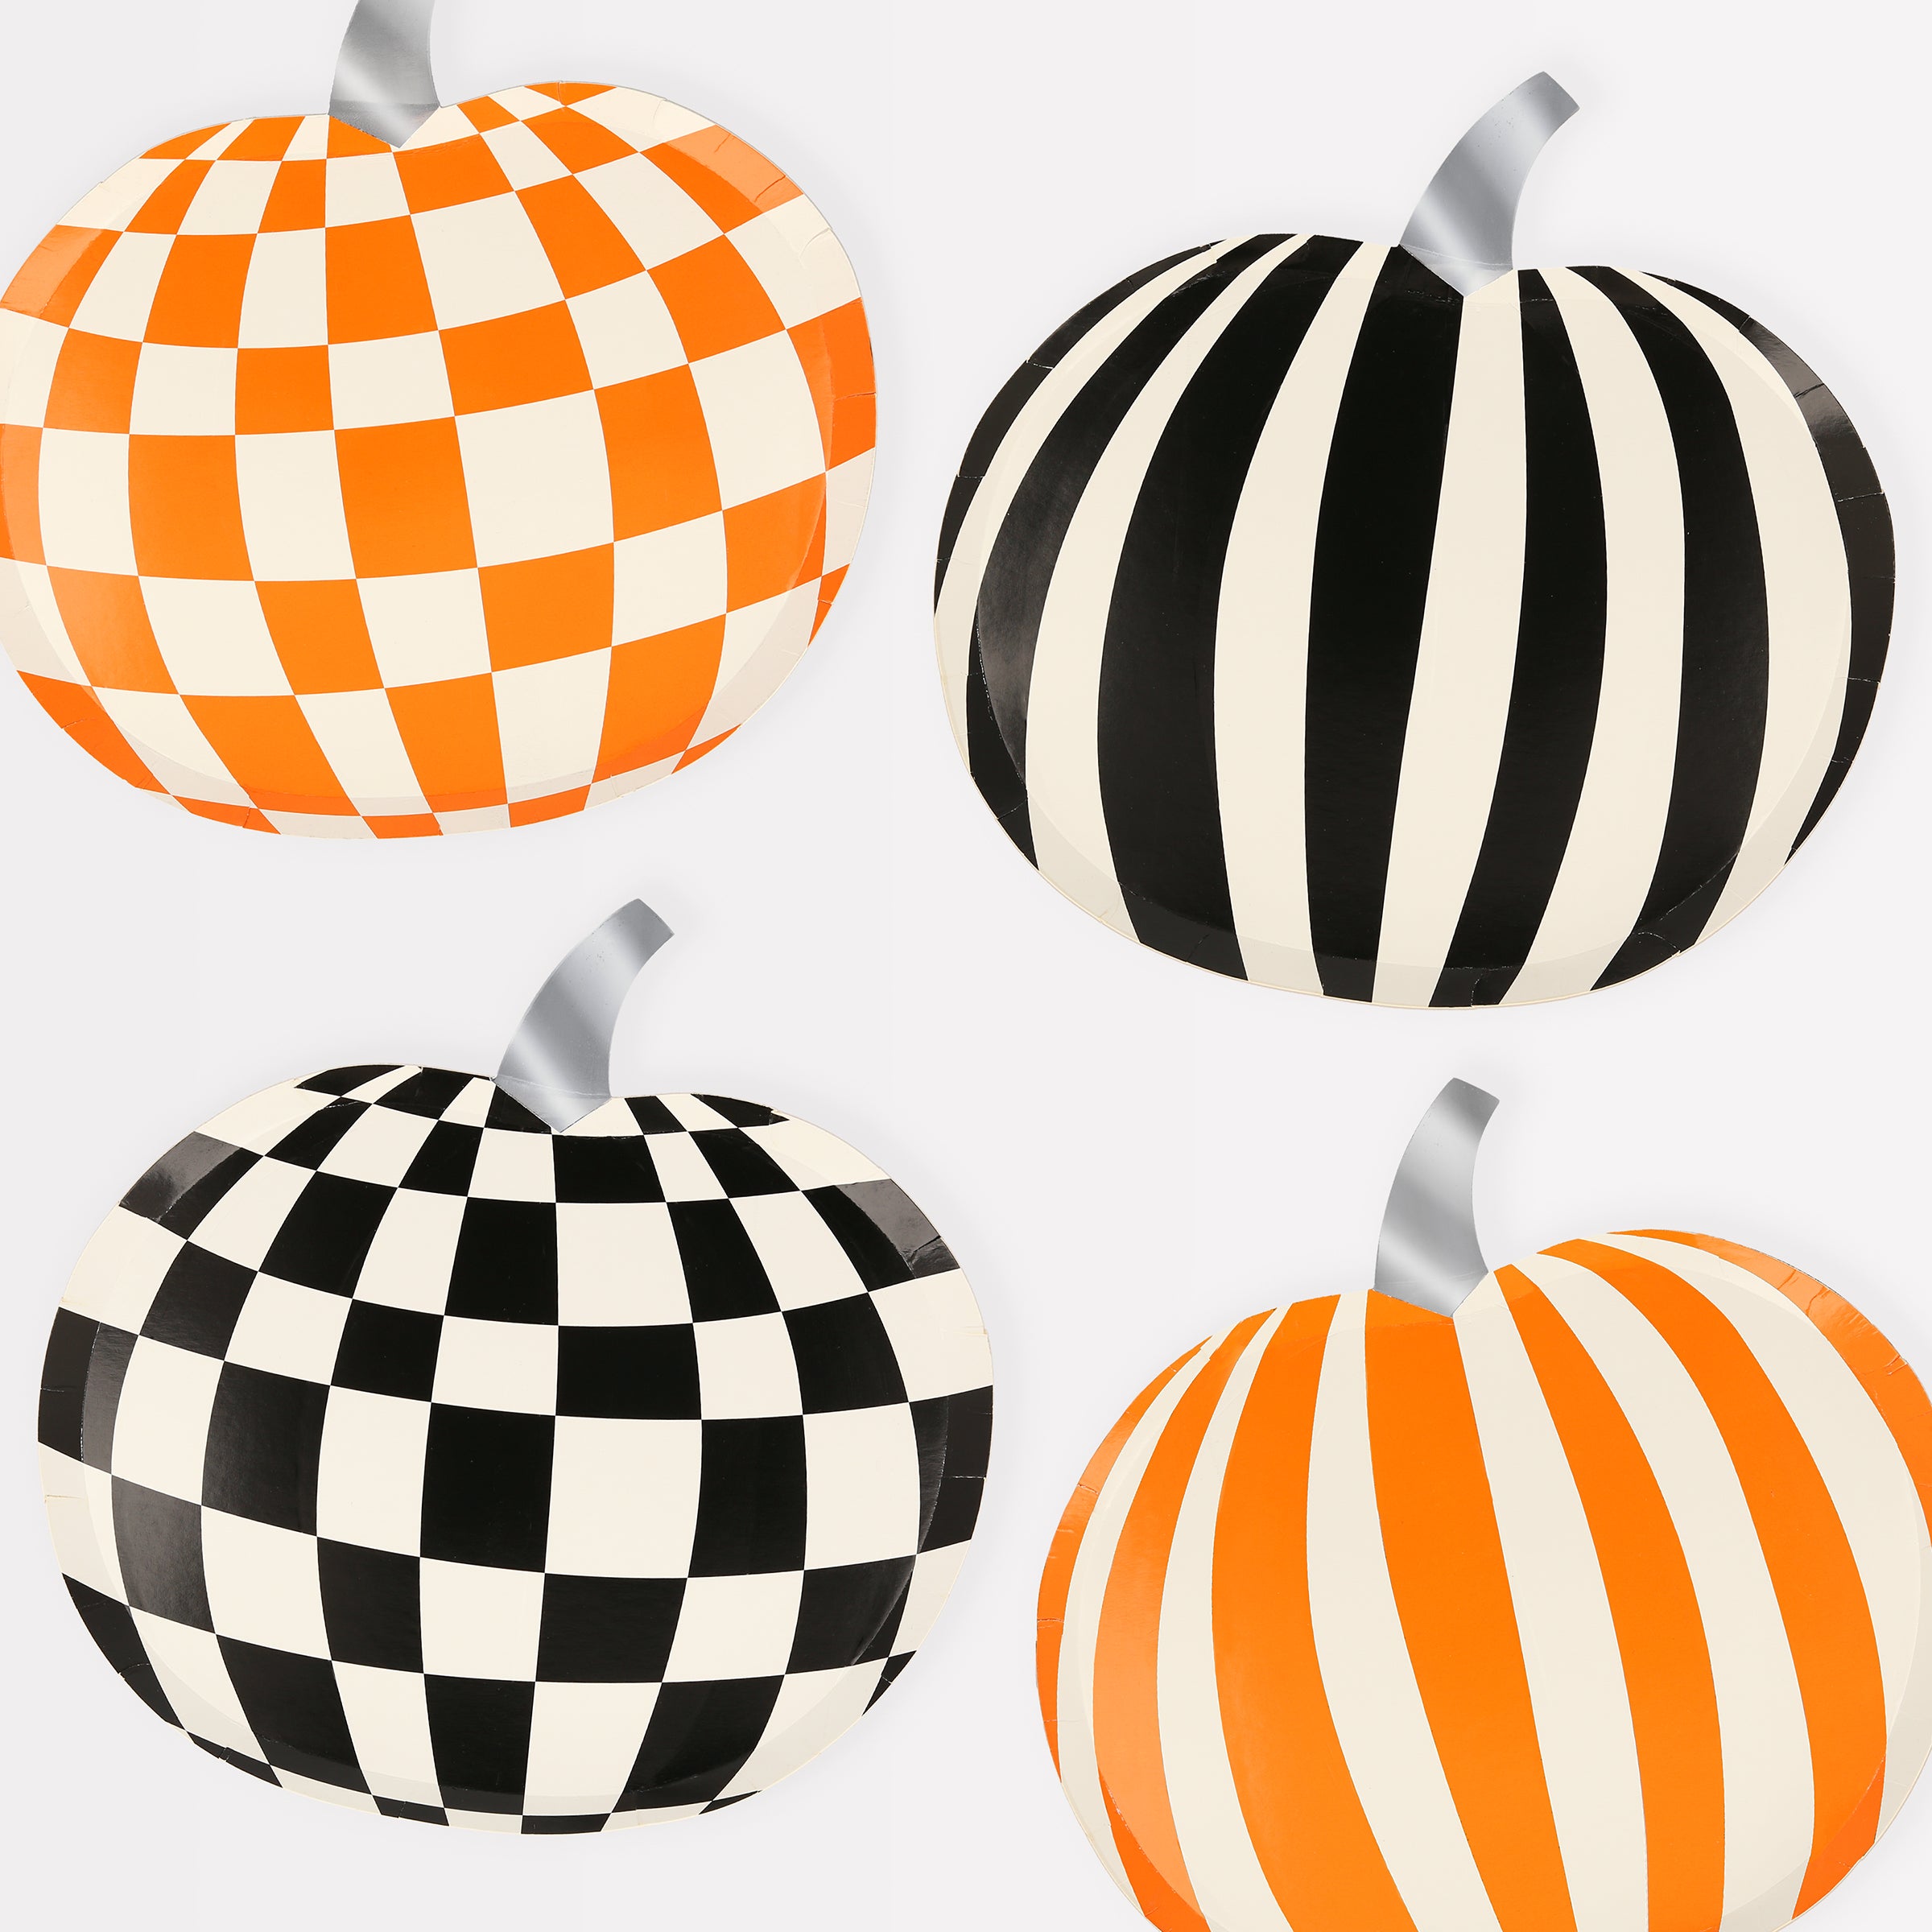 Our party plates, designed to look like pumpkins in retro colours, are perfect as Halloween table decorations.